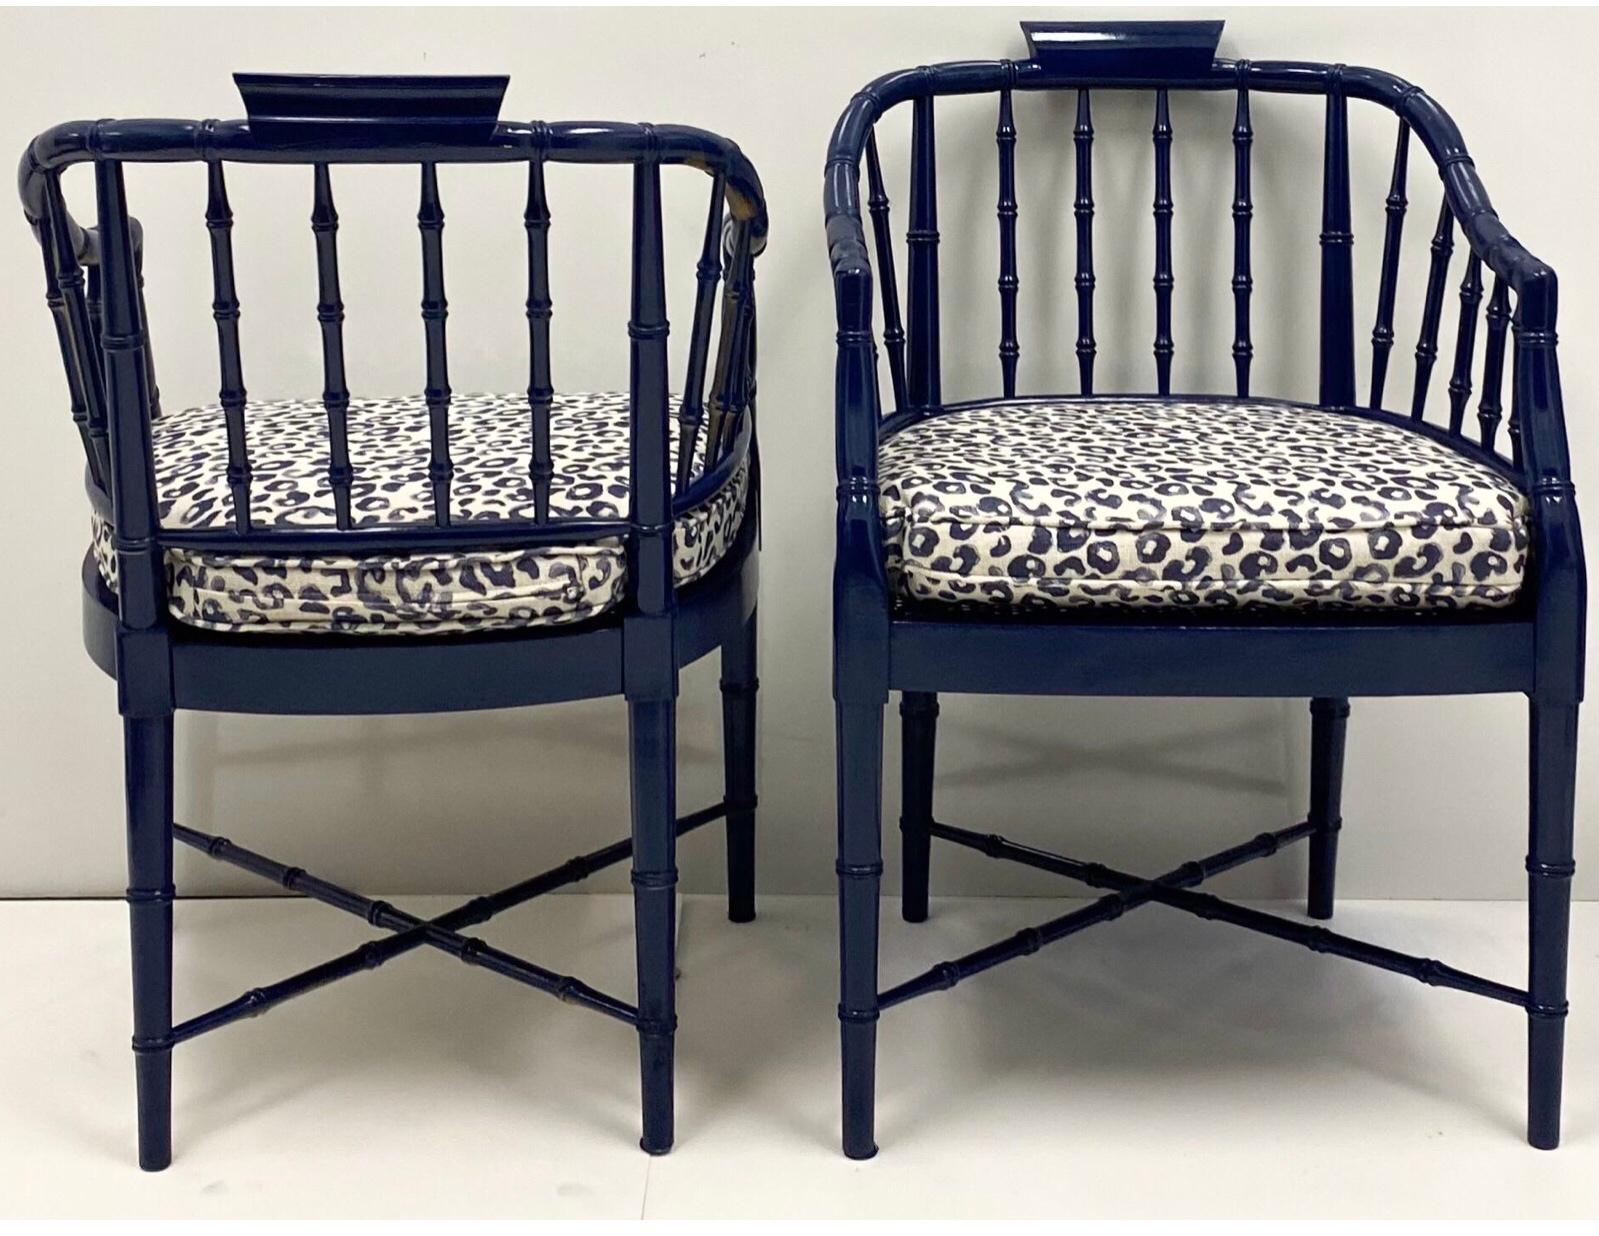 Chippendale 1970s Navy Lacquered Faux Bamboo Barrel Chairs with Leopard Cushions, a Pair